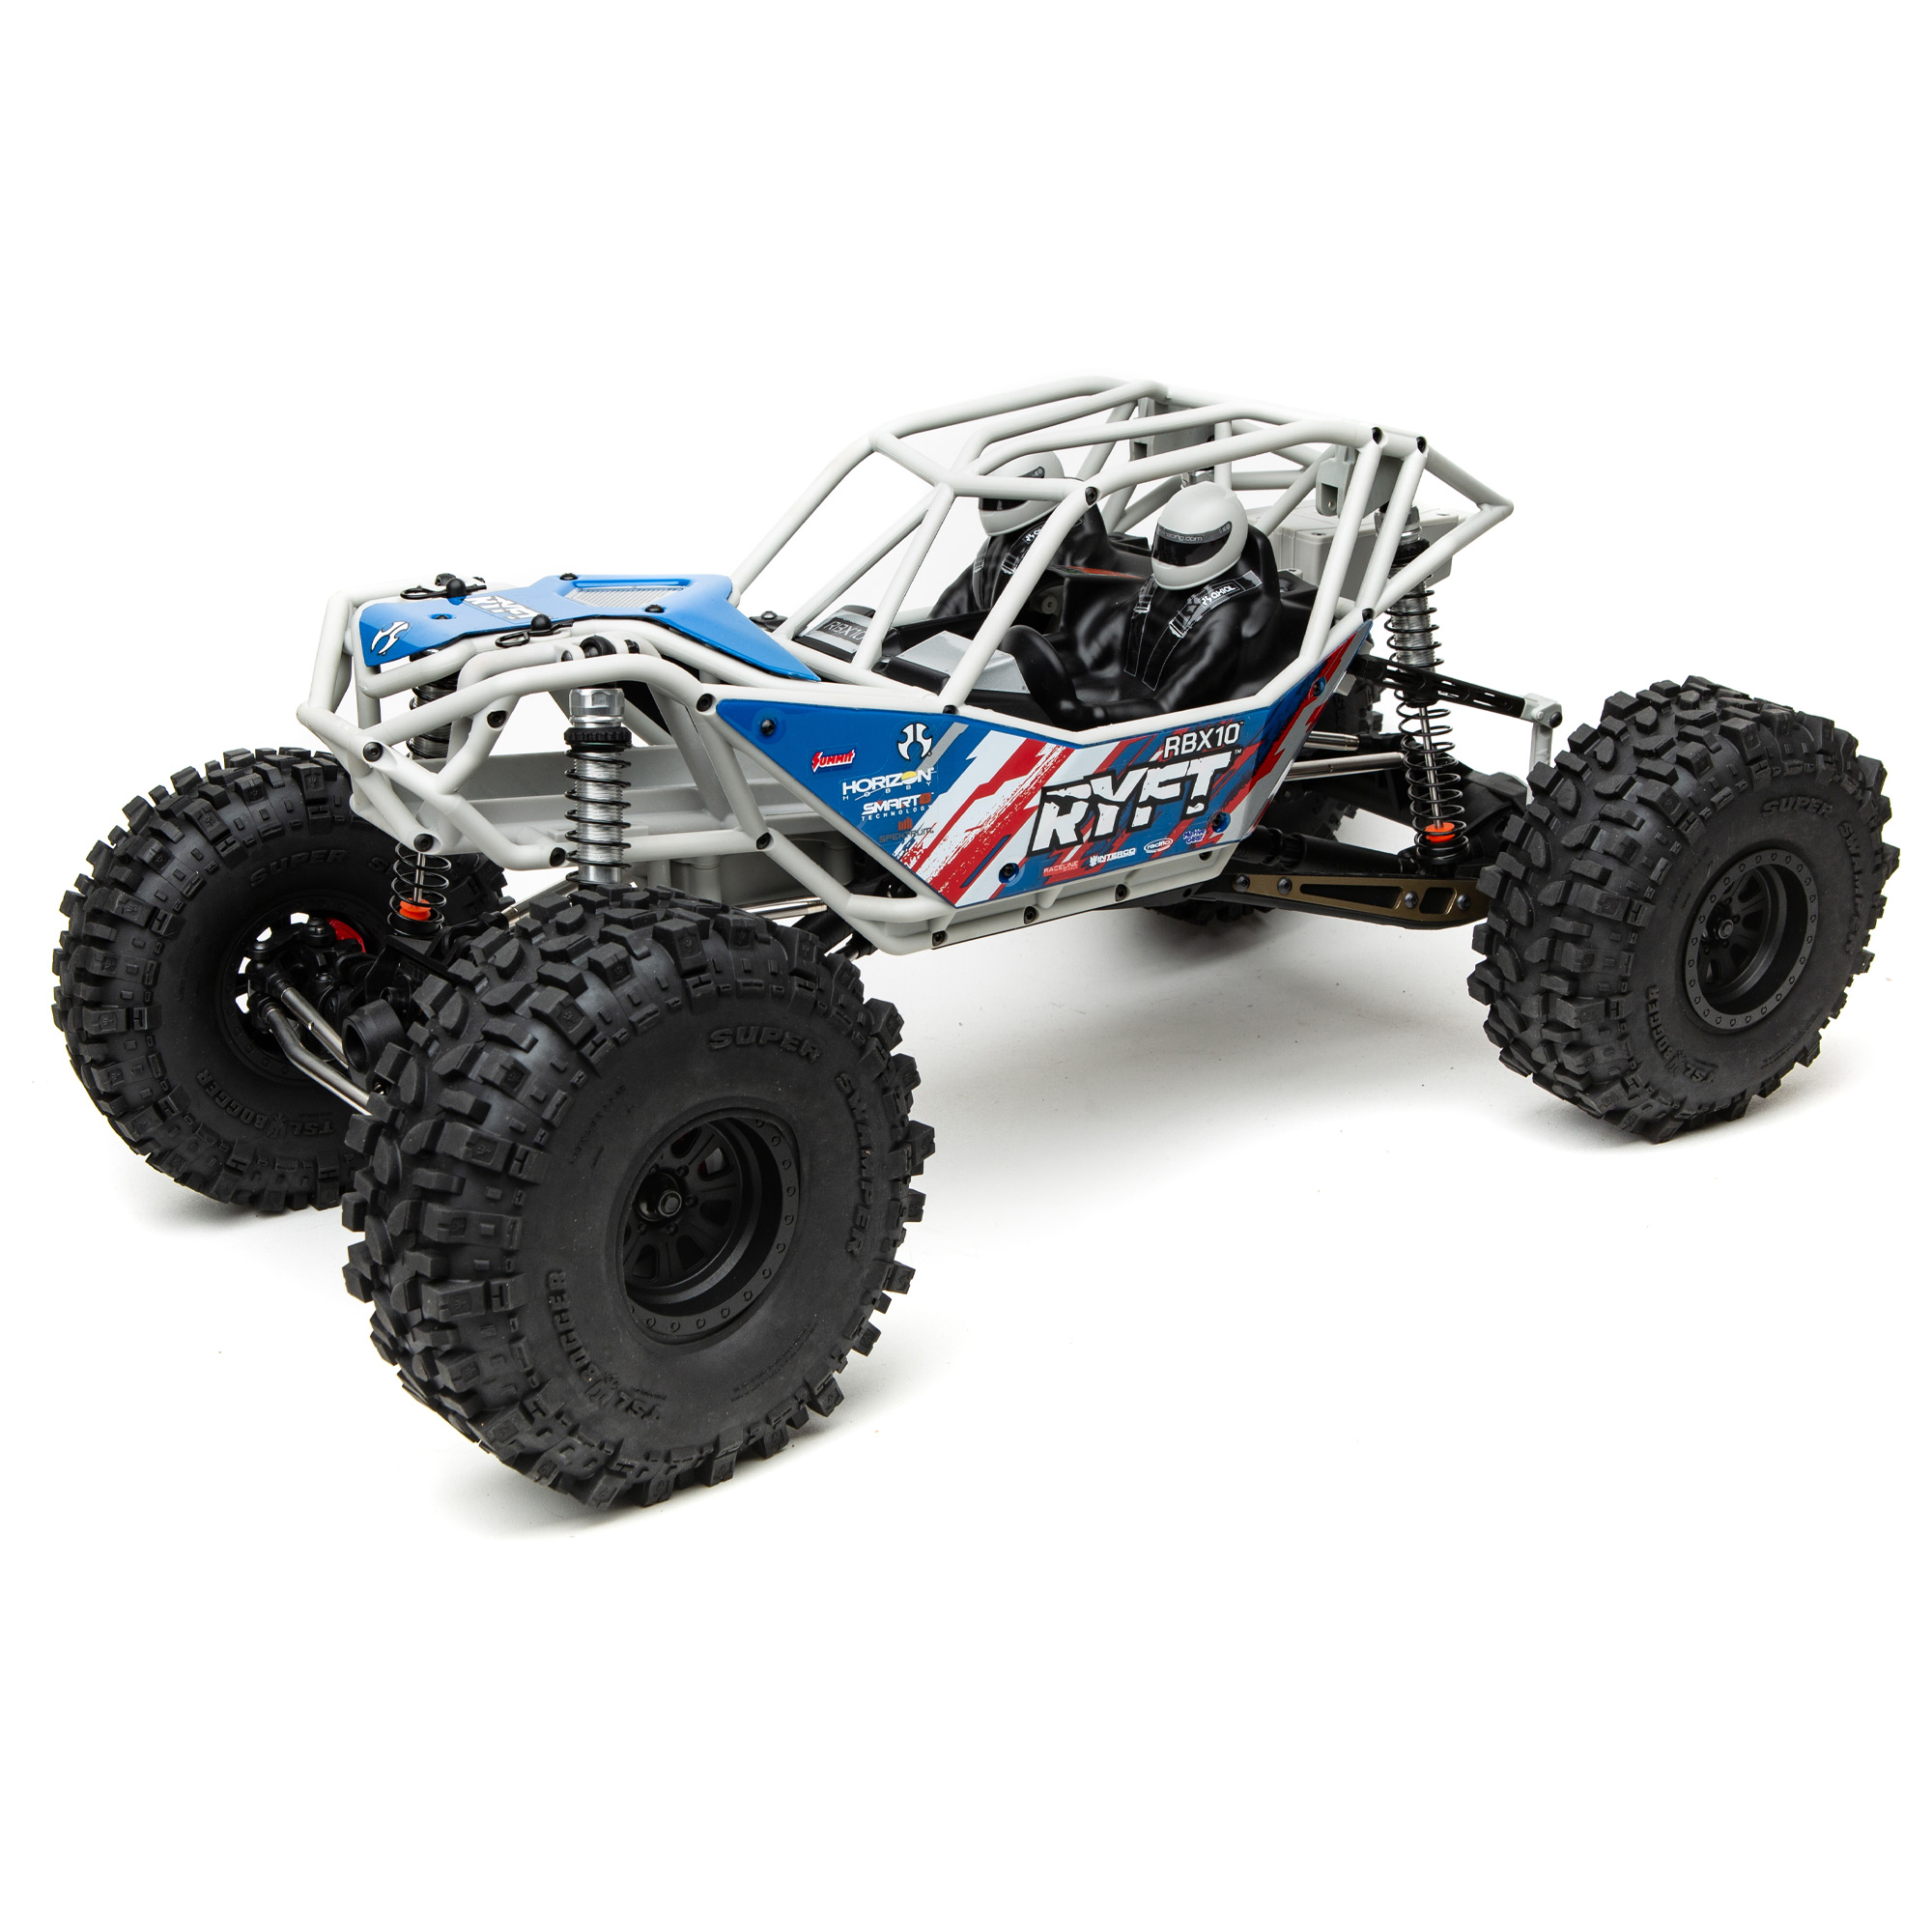 Axial RC Truck 1/10 RBX10 Ryft 4 Wheel Drive Rock Bouncer Kit Gray AXI03009 Trucks Elec Kit 1/10 Off-Road - image 1 of 11